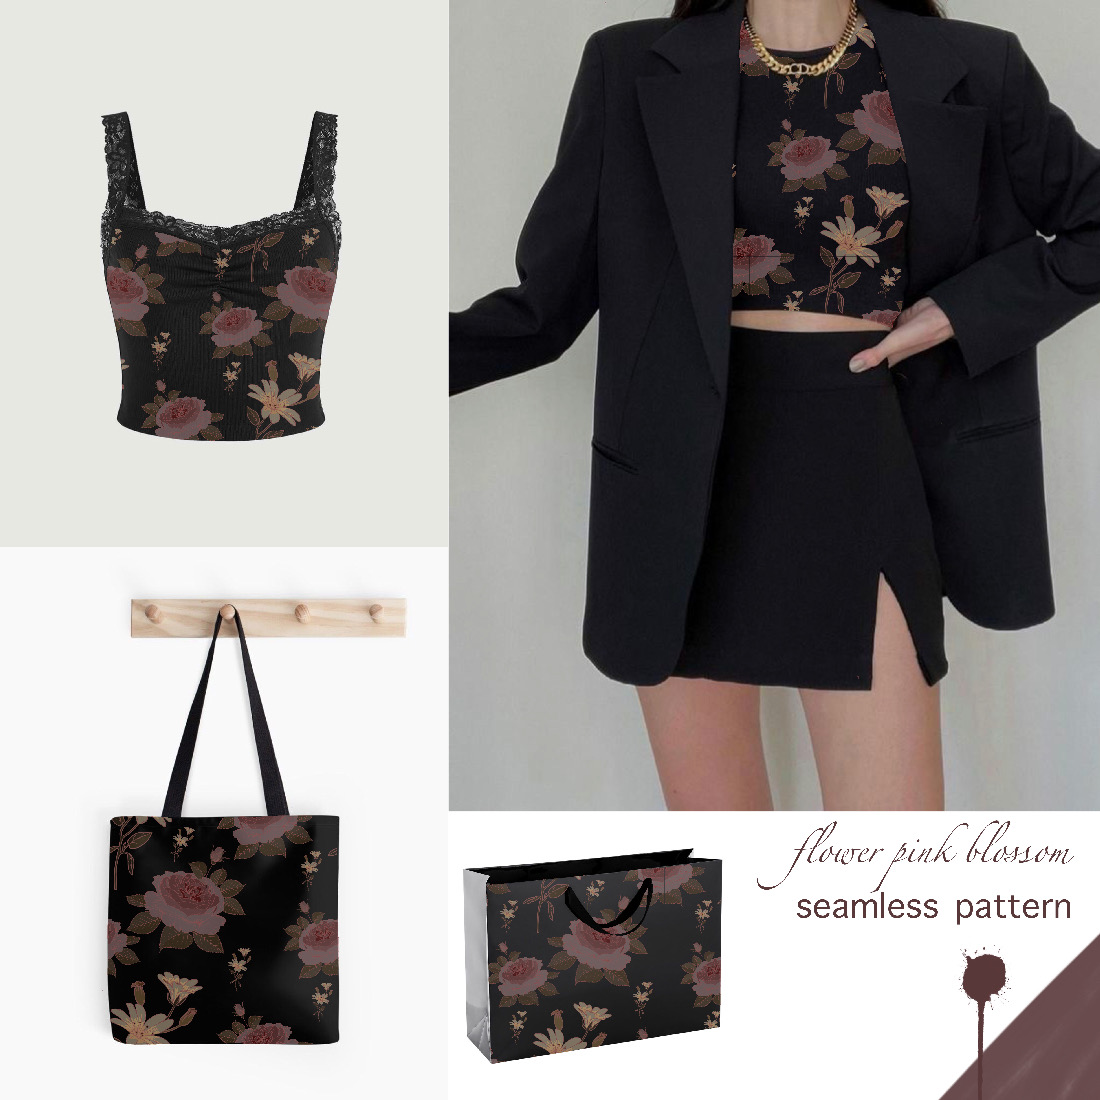 Neon Bloom Elegance: Seamless Pattern with Blossom Flower for Chic Women's Wear cover image.